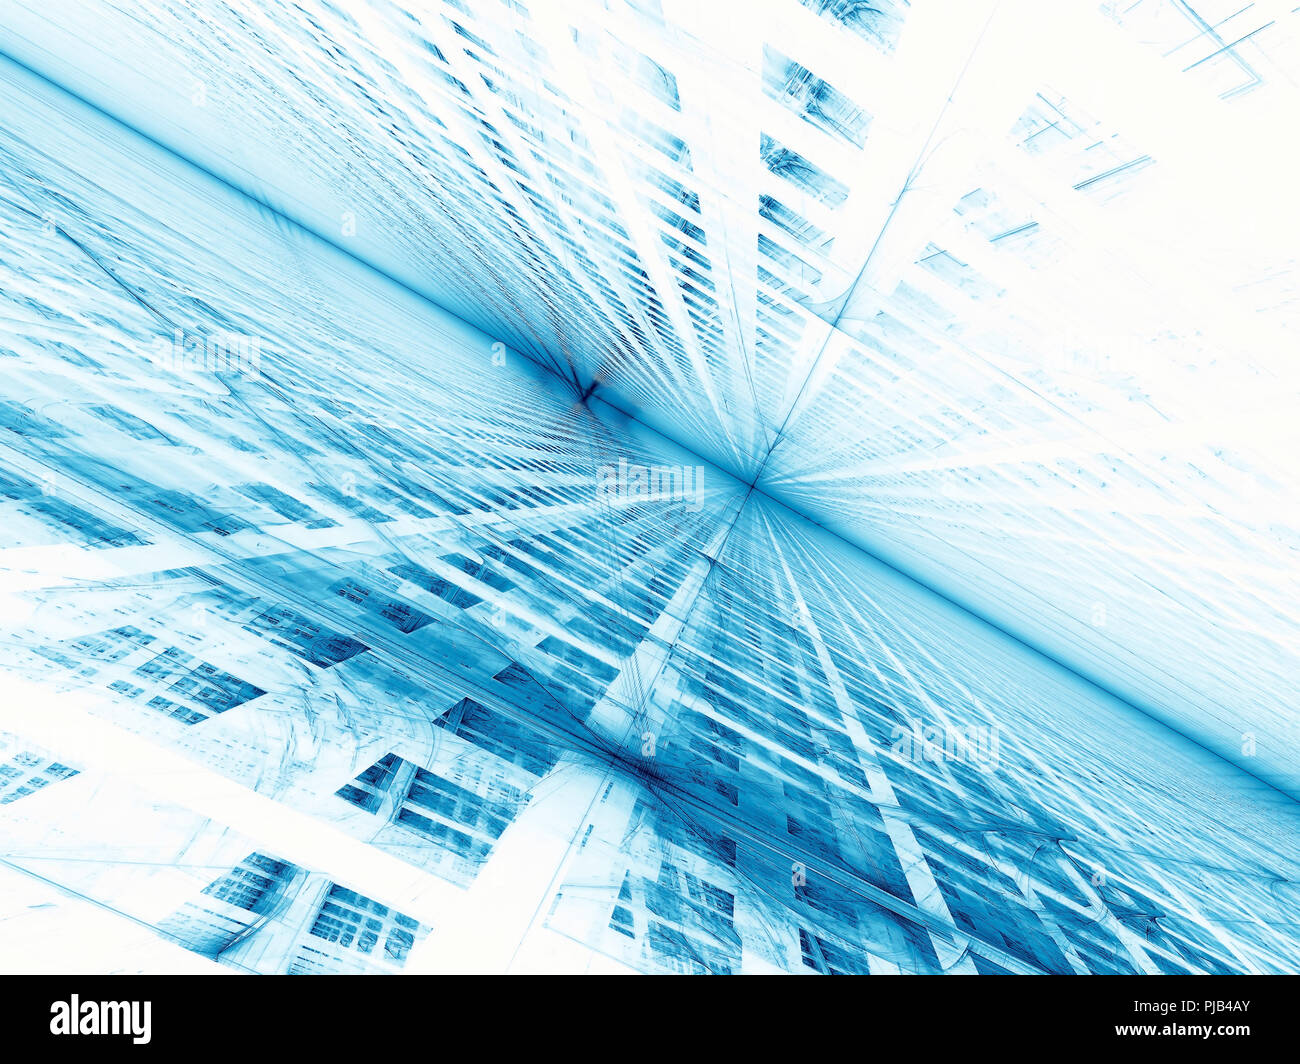 White-blue background with grid and lights - abstract digitally  Stock Photo